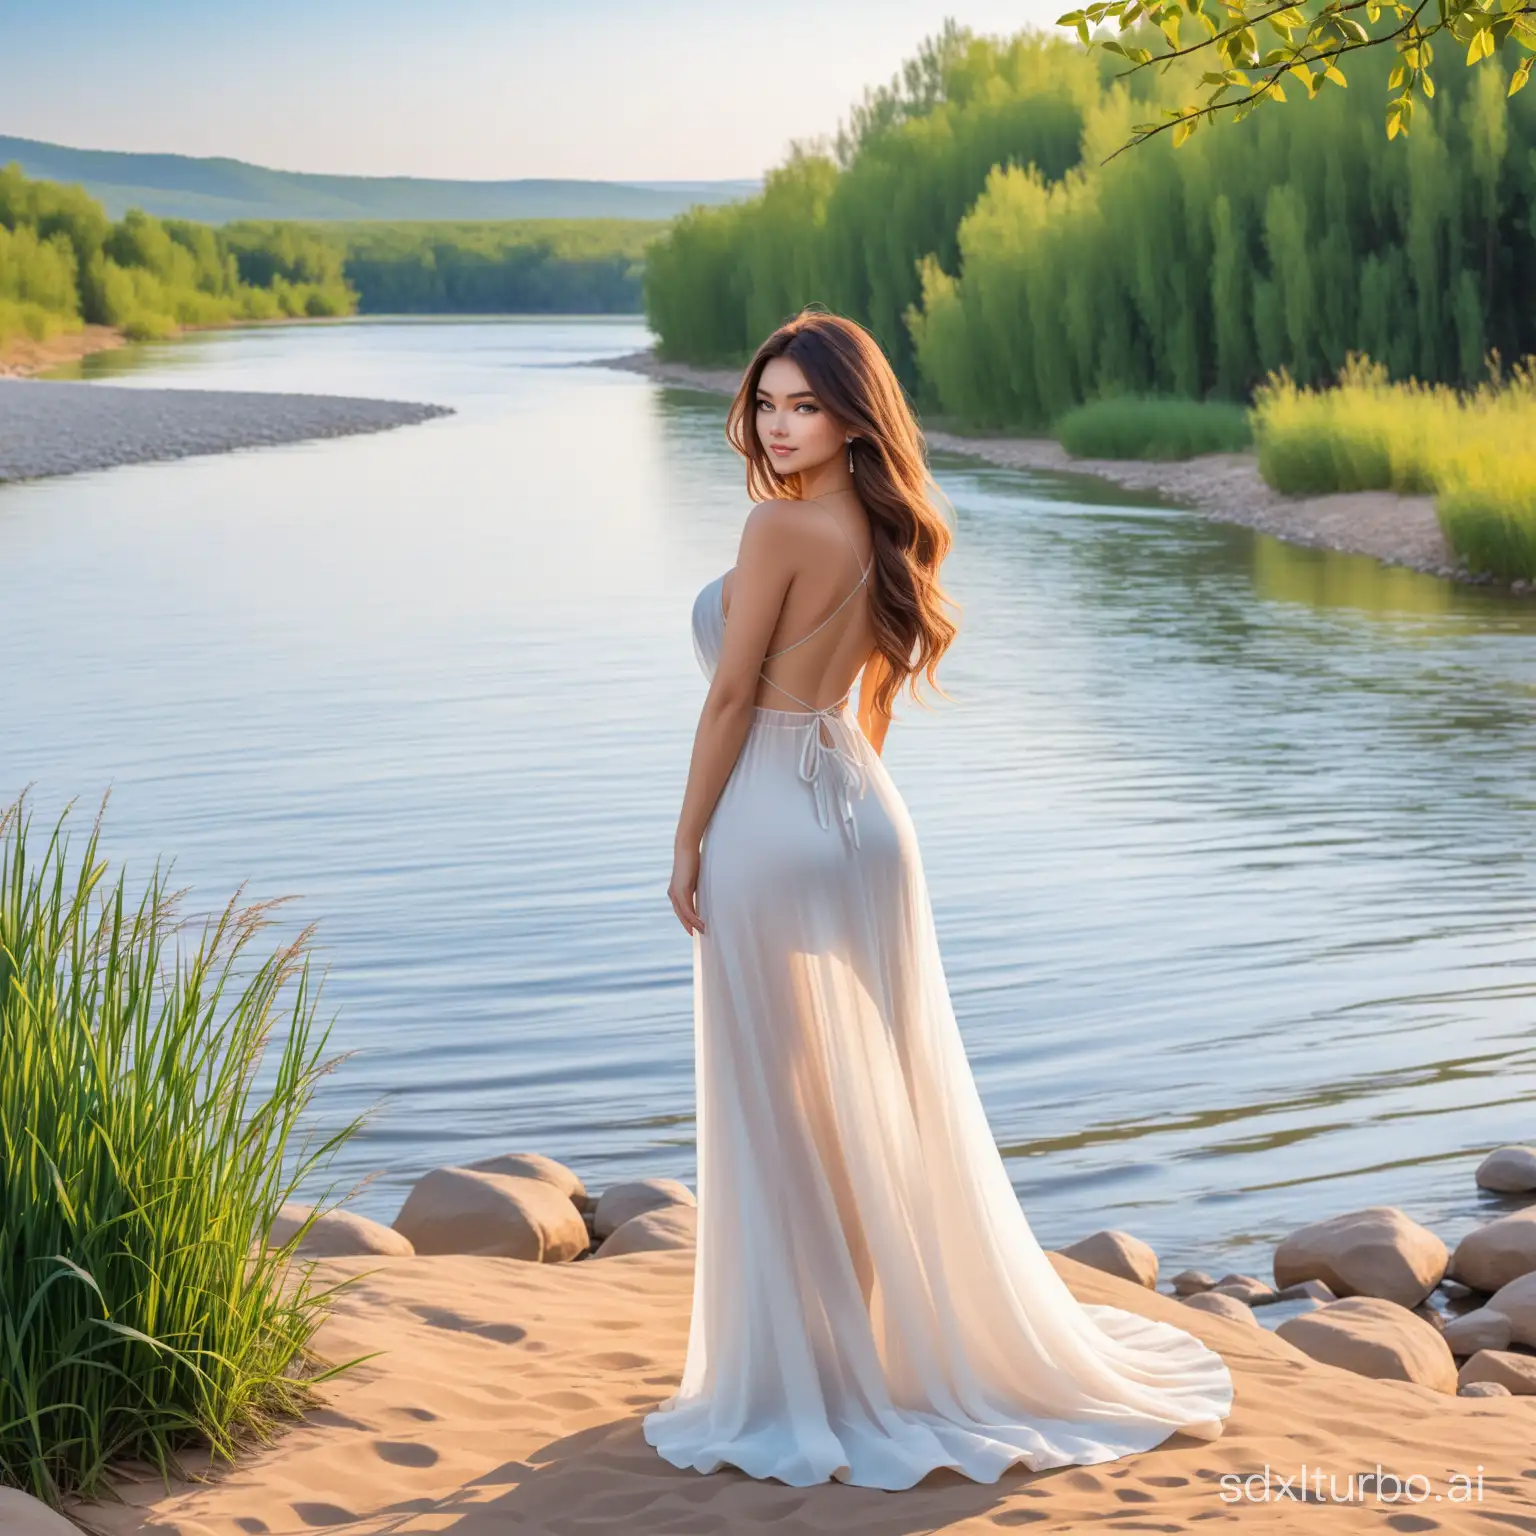 Graceful-Woman-by-the-Riverbank